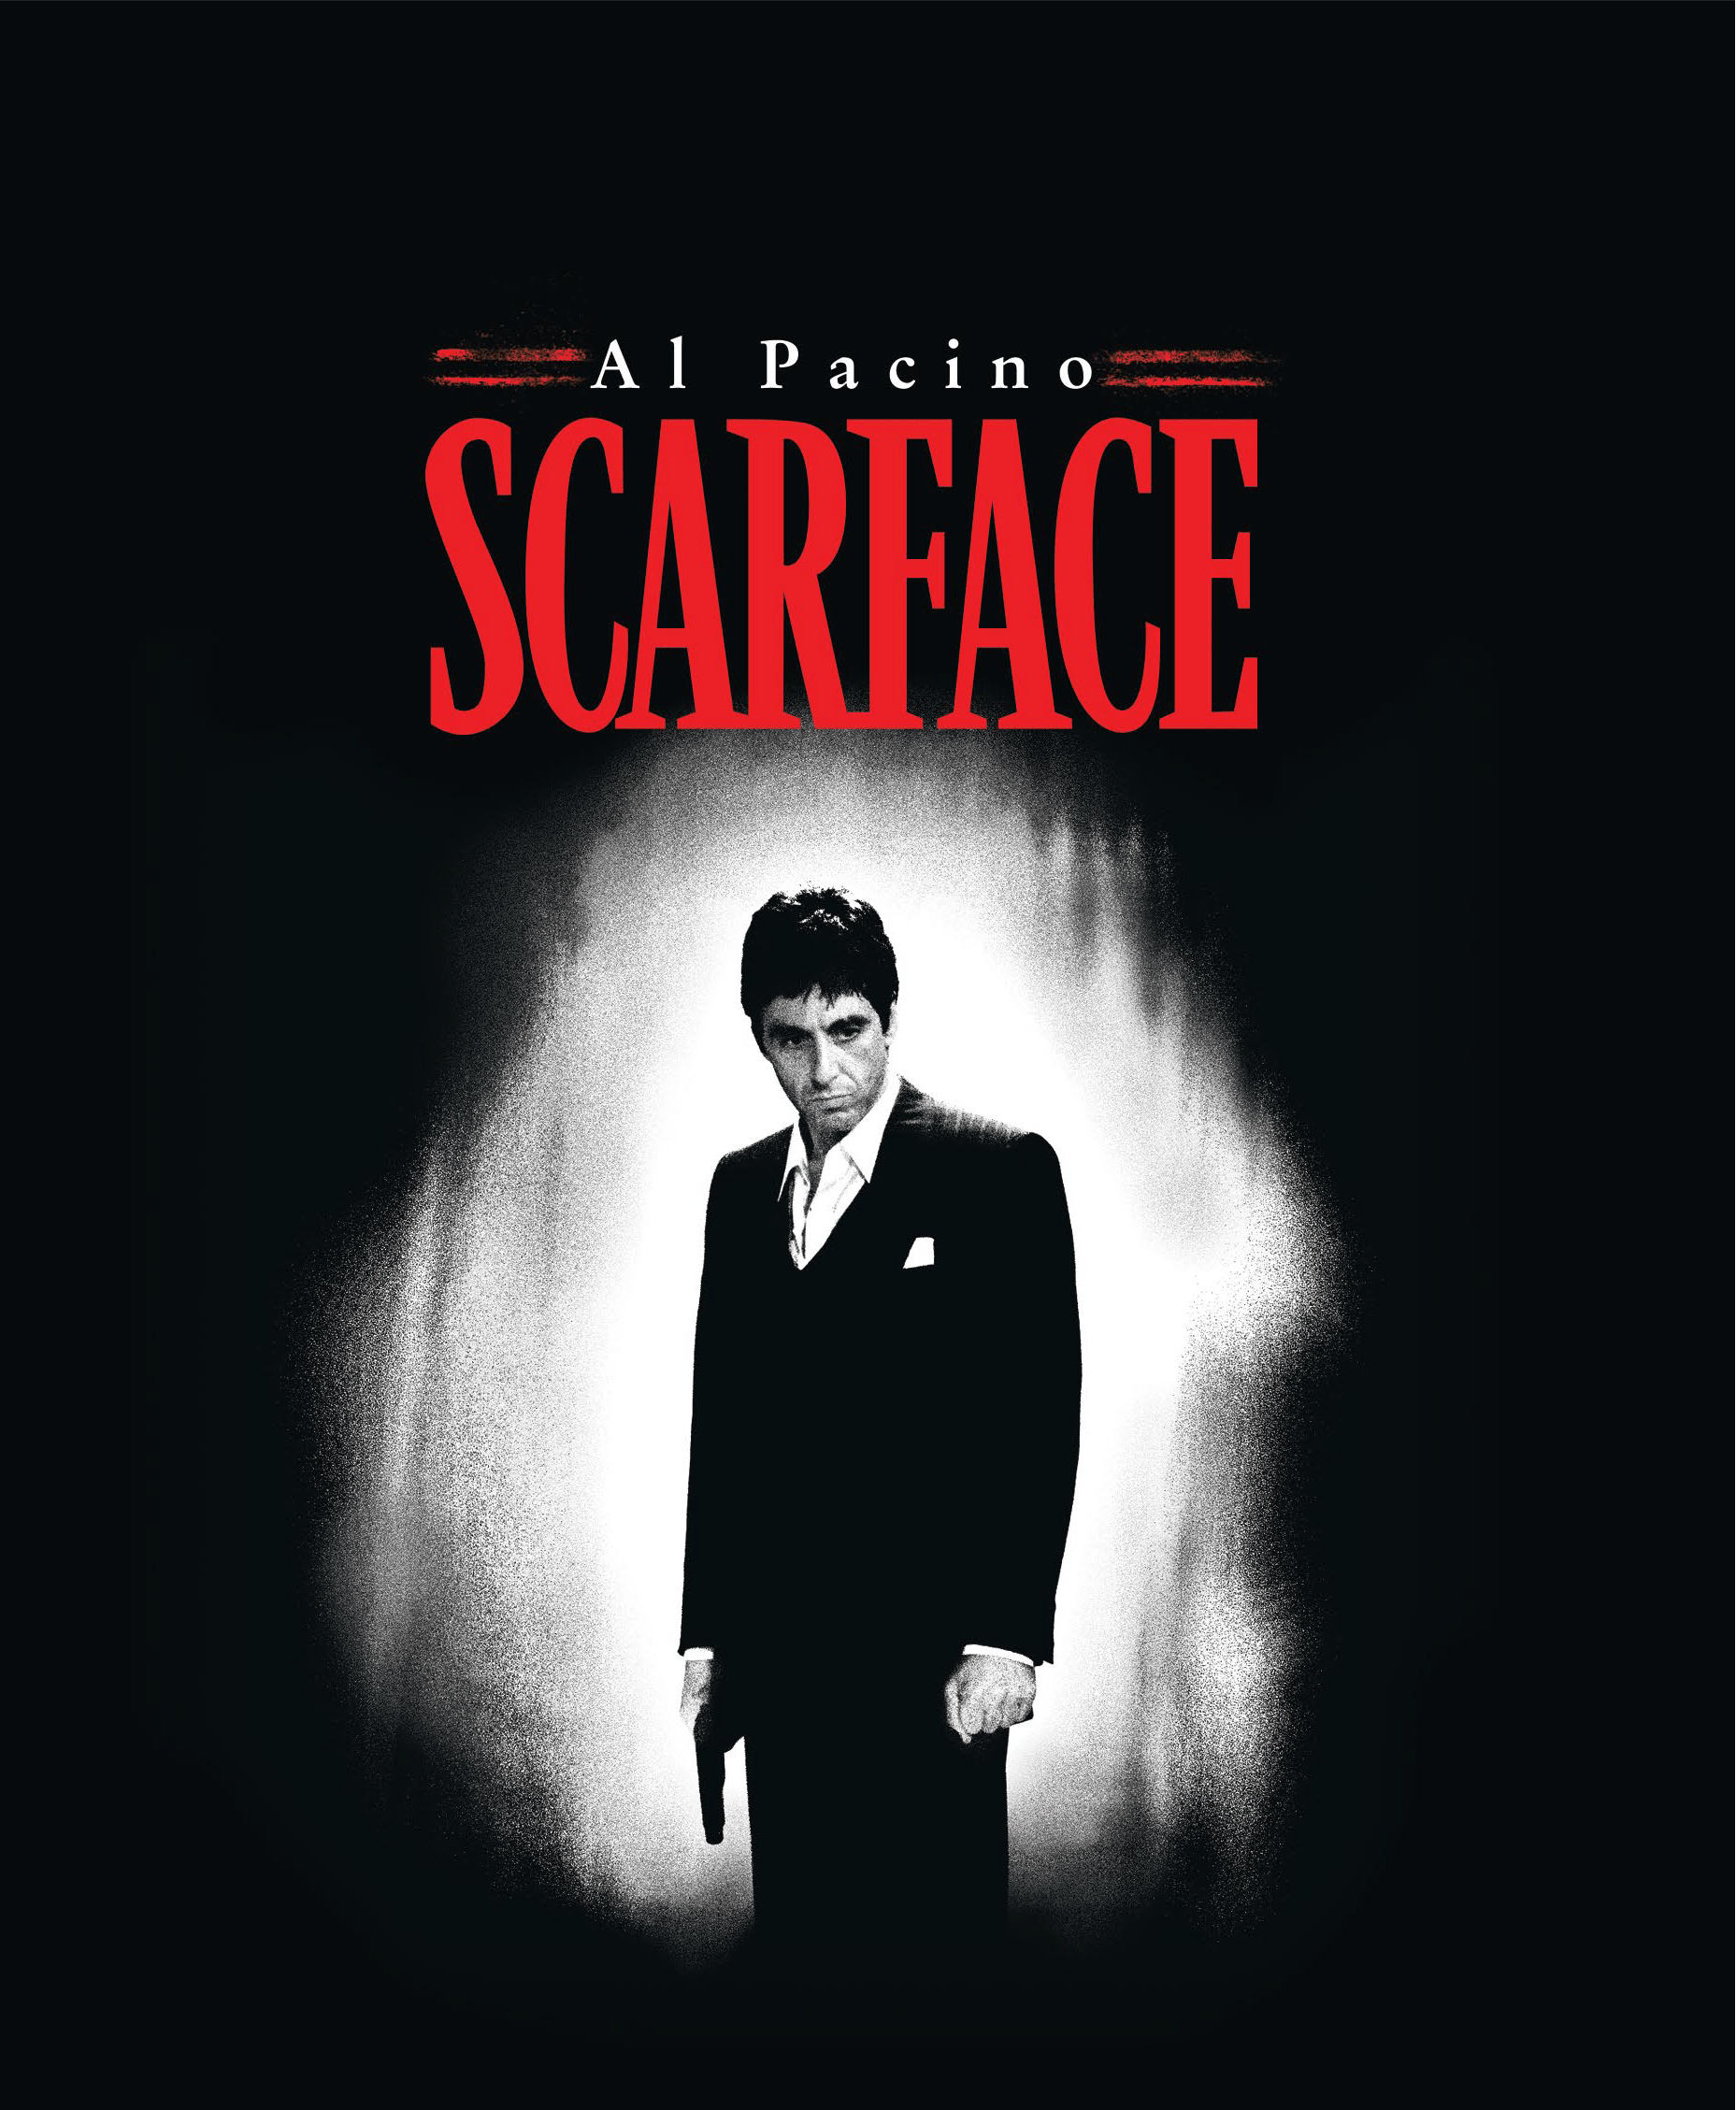 HD wallpaper, Gangster Classic, Scarface Movie, Iphone Hd Scarface Background, Iphone Wallpapers, 1860X2260 Hd Phone